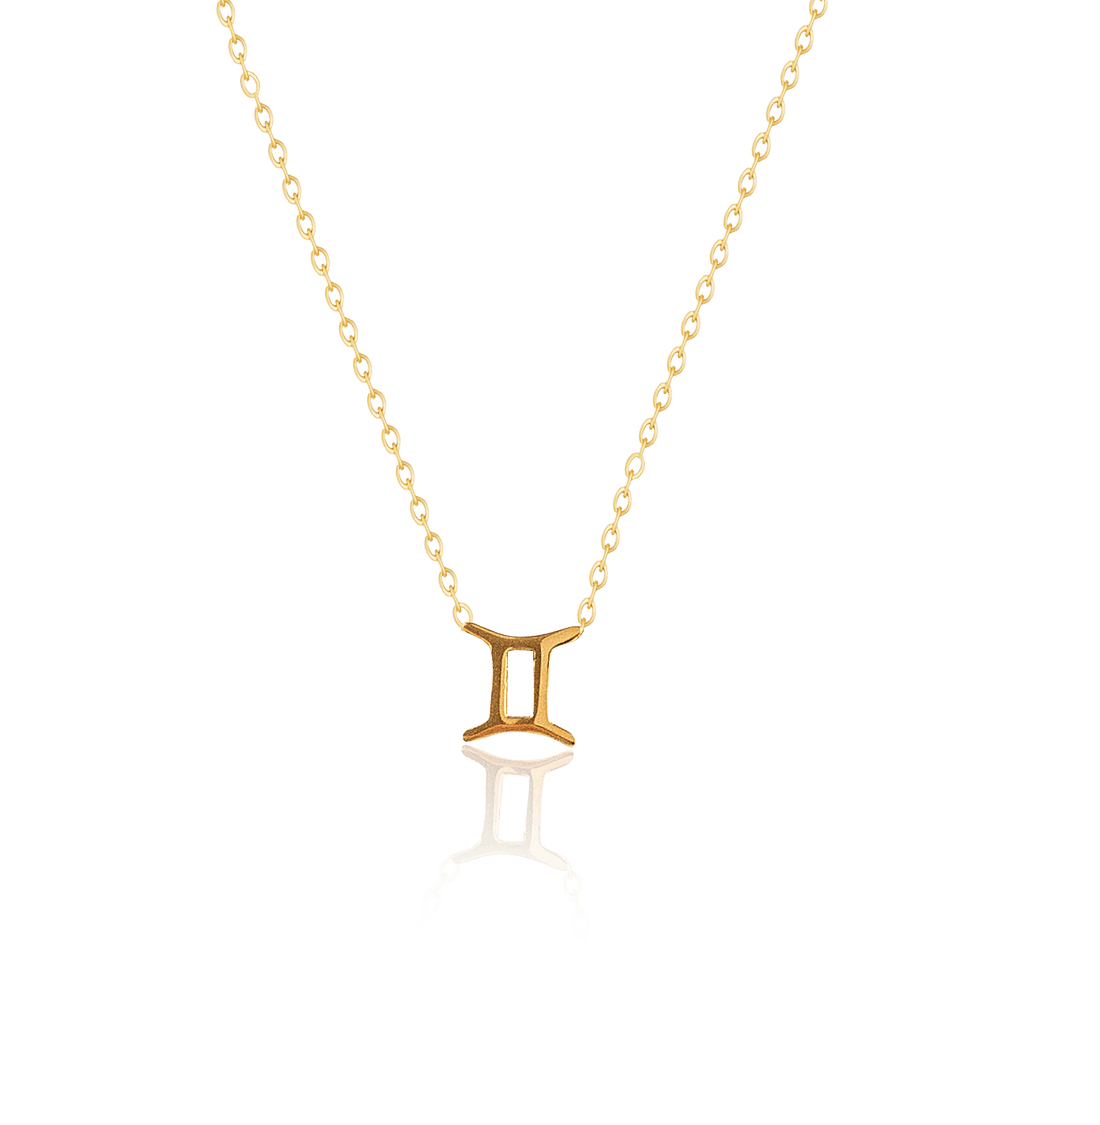 bianco rosso Necklaces Gold Gemini - Necklace cyprus greece jewelry gift free shipping europe worldwide